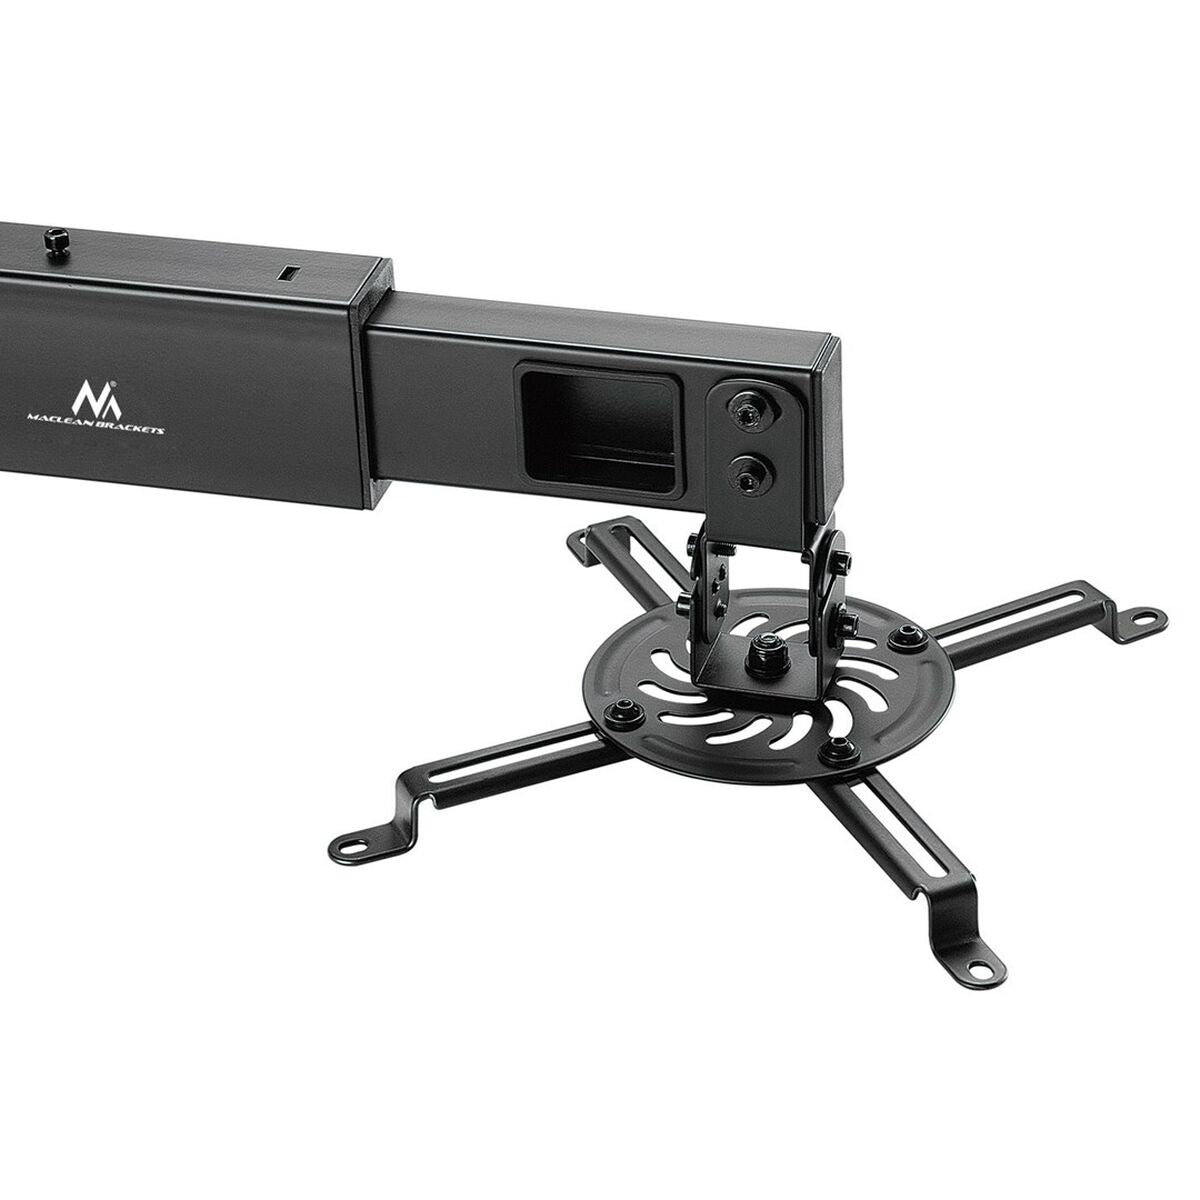 Expandable Wall Support for a Projector MacLean MC-945 Black